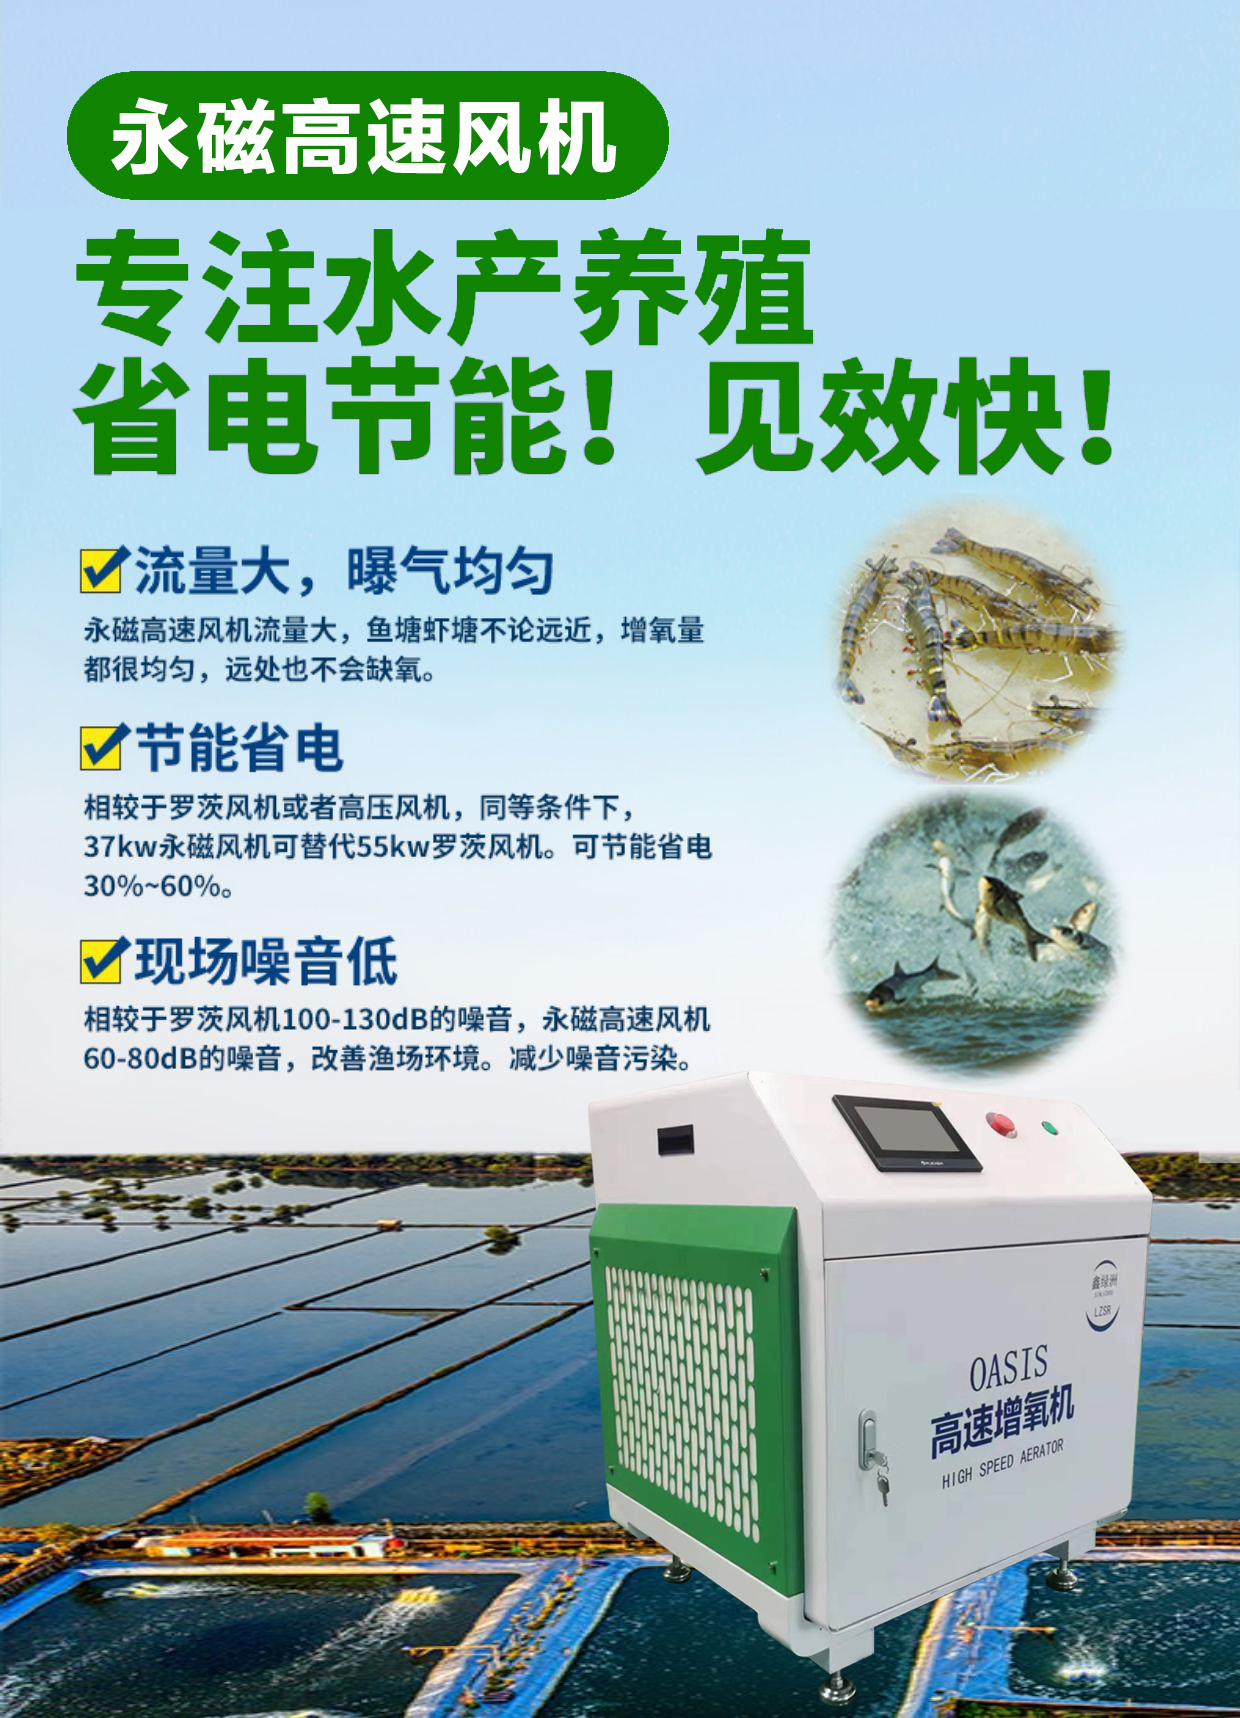 Replacing Roots blower oxygen pump with high-density aquaculture for energy-saving high-frequency 15kw high-speed oxygen generator